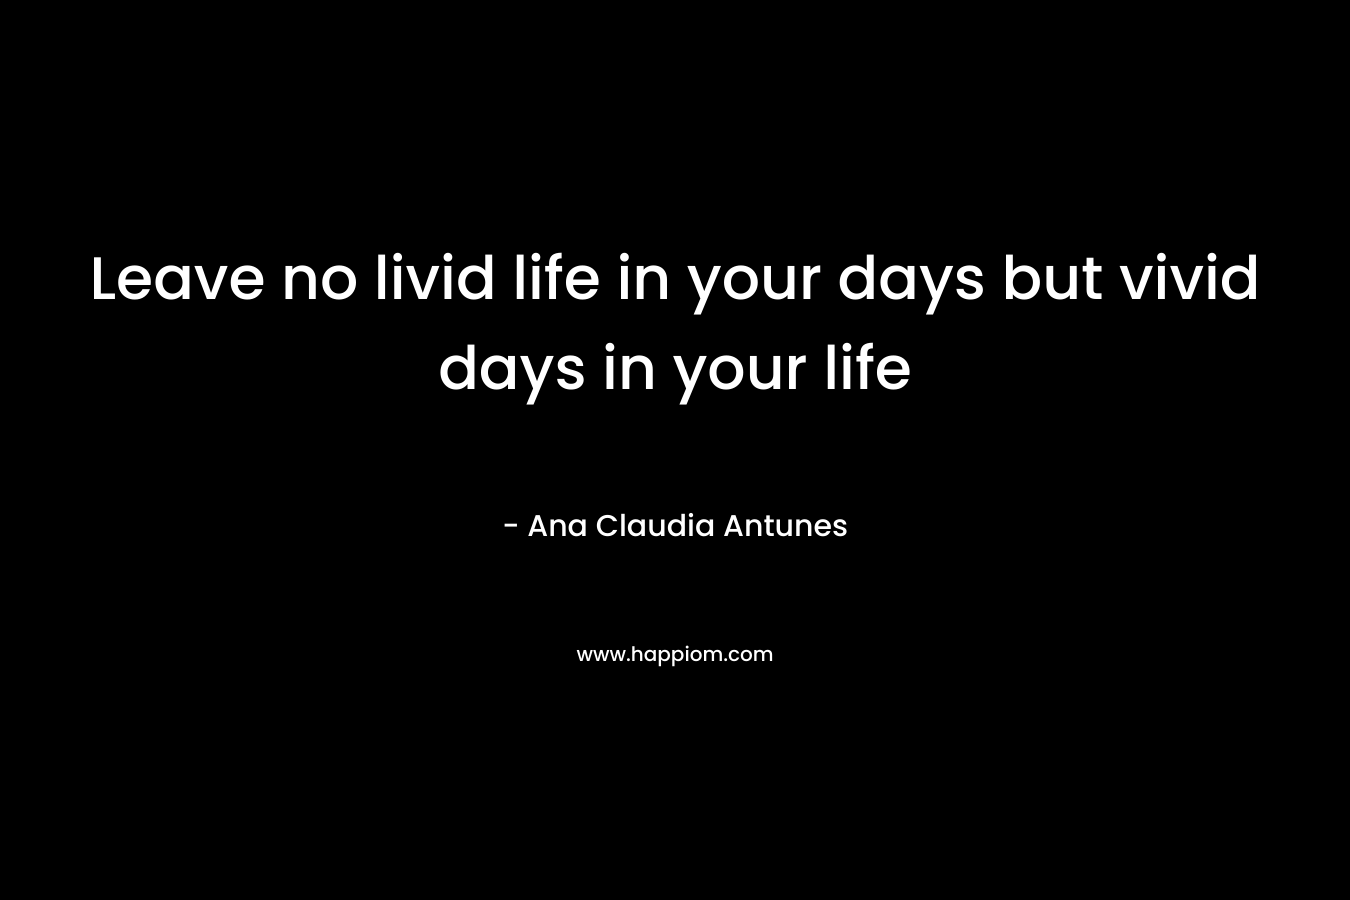 Leave no livid life in your days but vivid days in your life – Ana Claudia Antunes